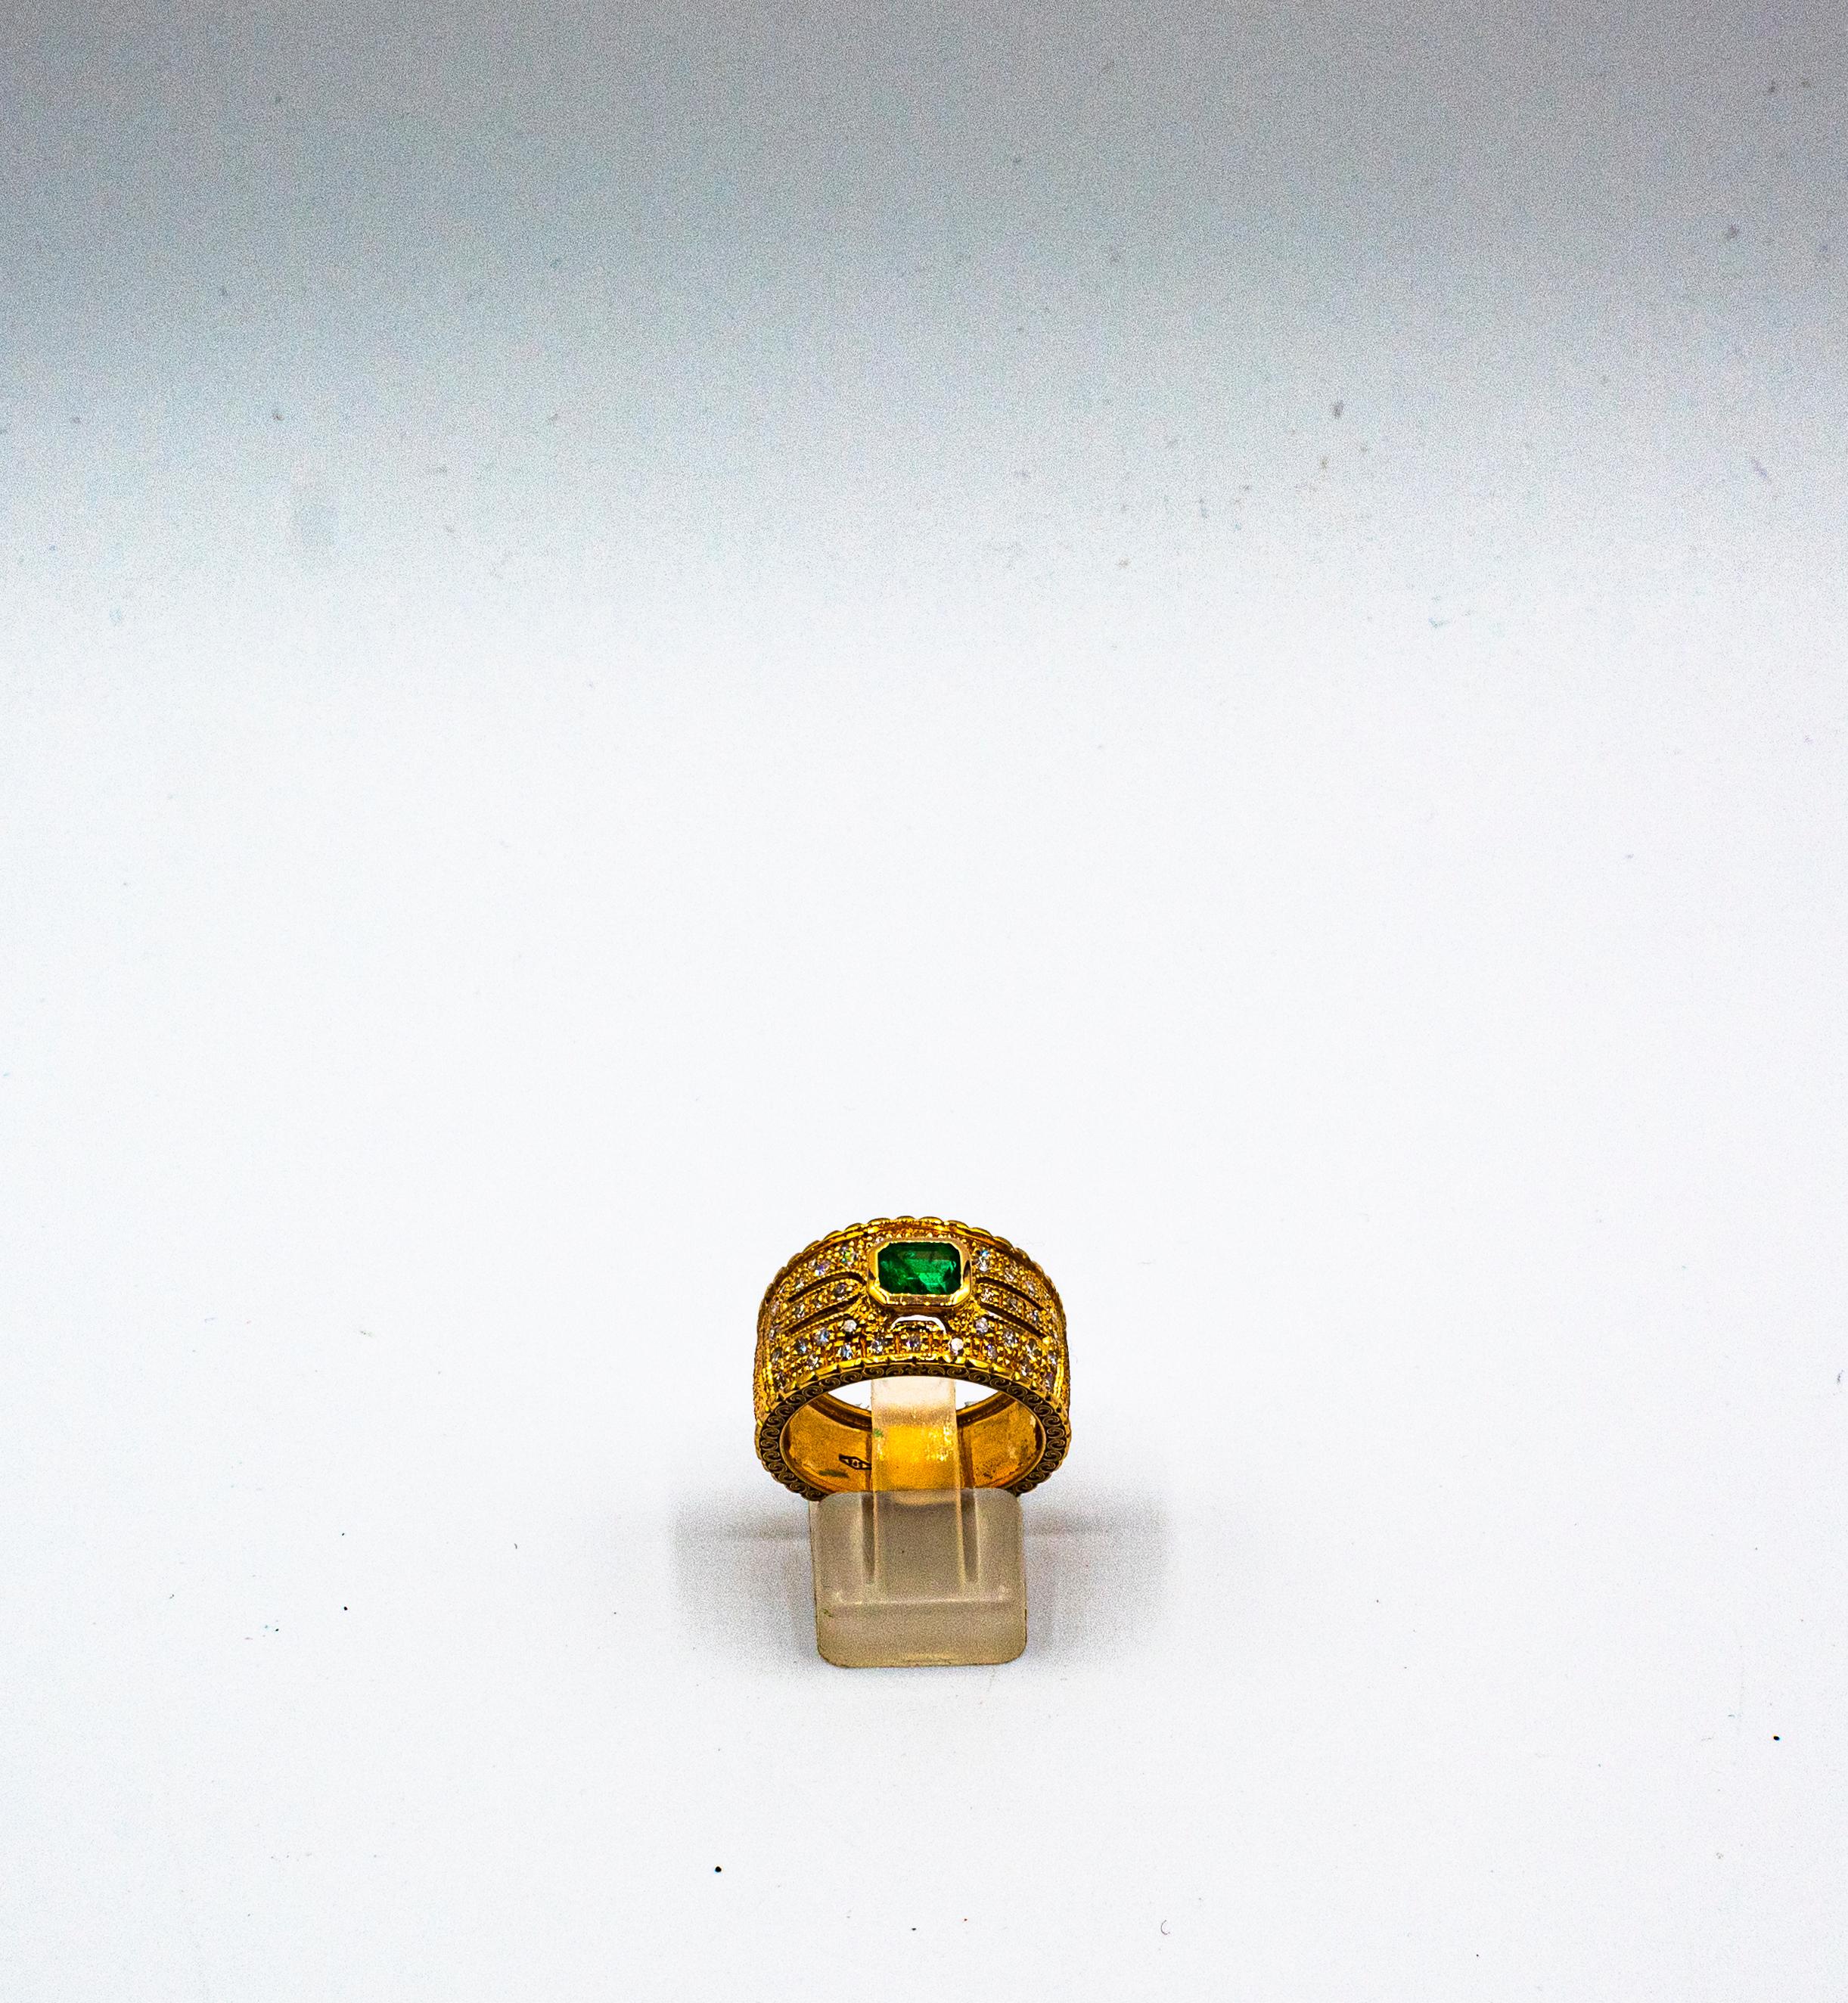 This Ring is made of 14K Yellow Gold.
This Ring has 0.50 Carats of White Brilliant Cut Diamonds.
This Ring has a 0.84 Carats Natural Zambia Emerald Cut Emerald.
This Ring is inspired by Art Deco.

Size ITA: 15 USA: 7 1/4

We're a workshop so every